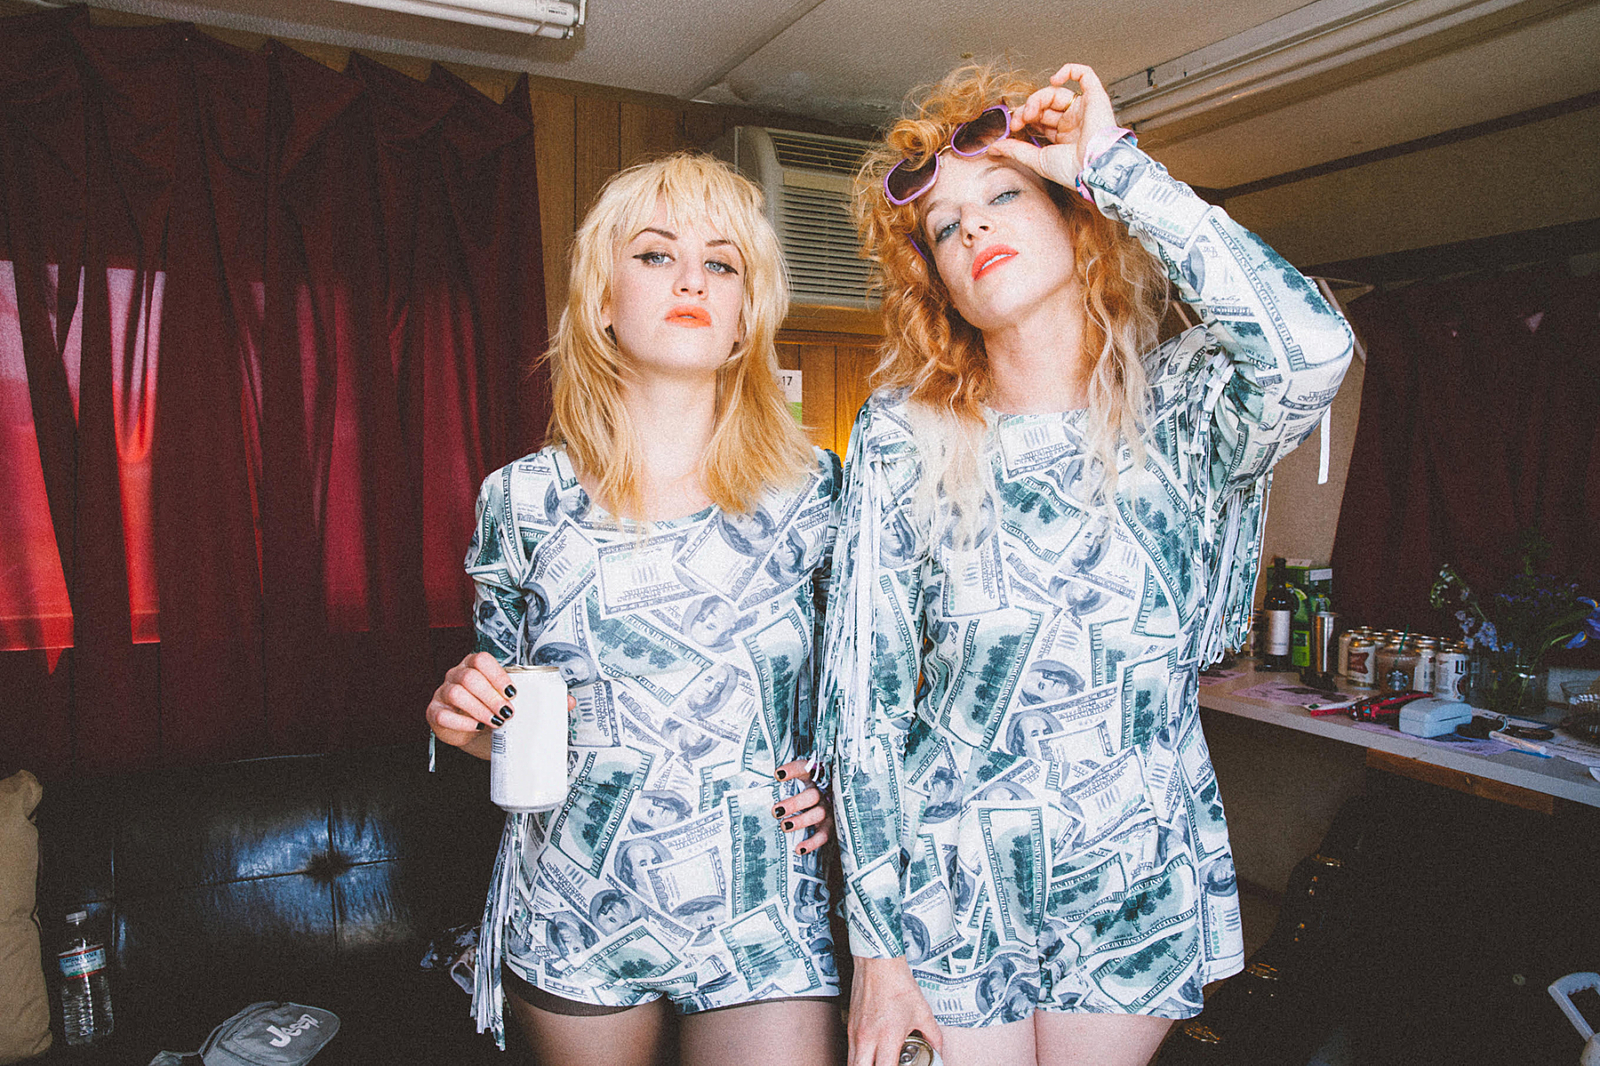 "It's gonna be a rowdy show" - Deap Vally prep for their Fluffer Pit Party